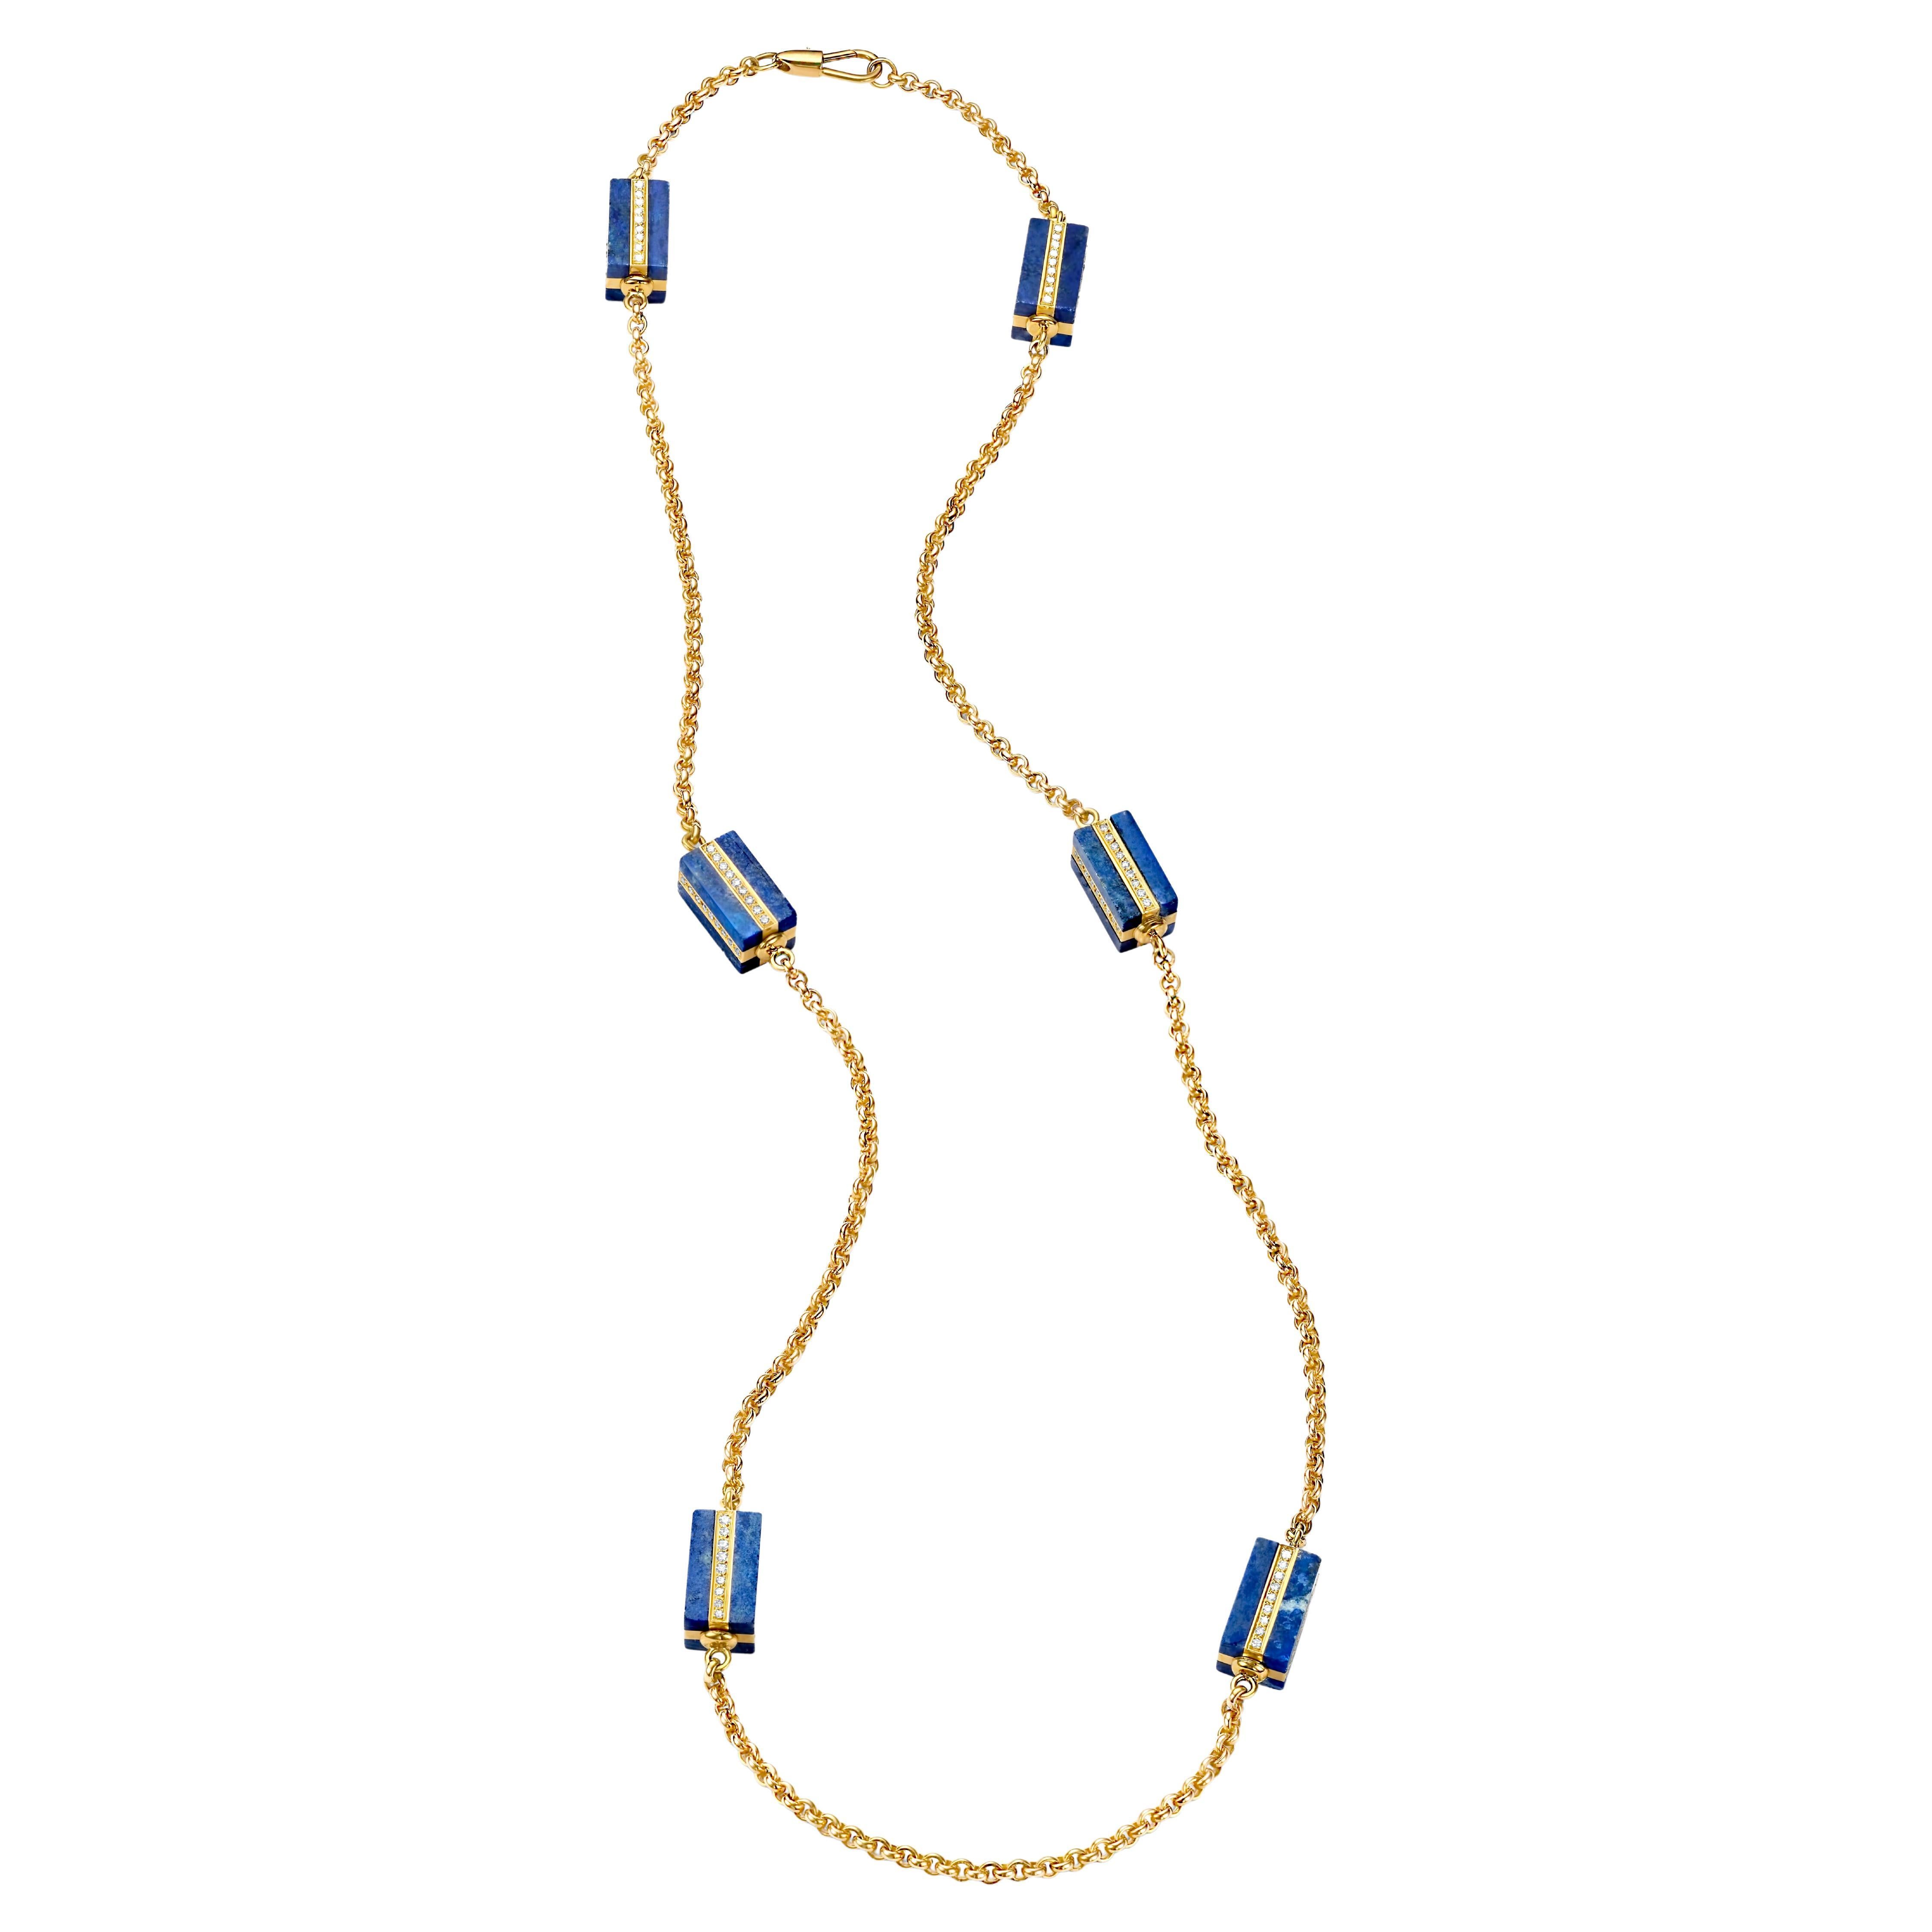 Long Necklace with Lapis Lazuli and 4.32 Ct Diamonds, Estate Sultan Oman Qaboos For Sale